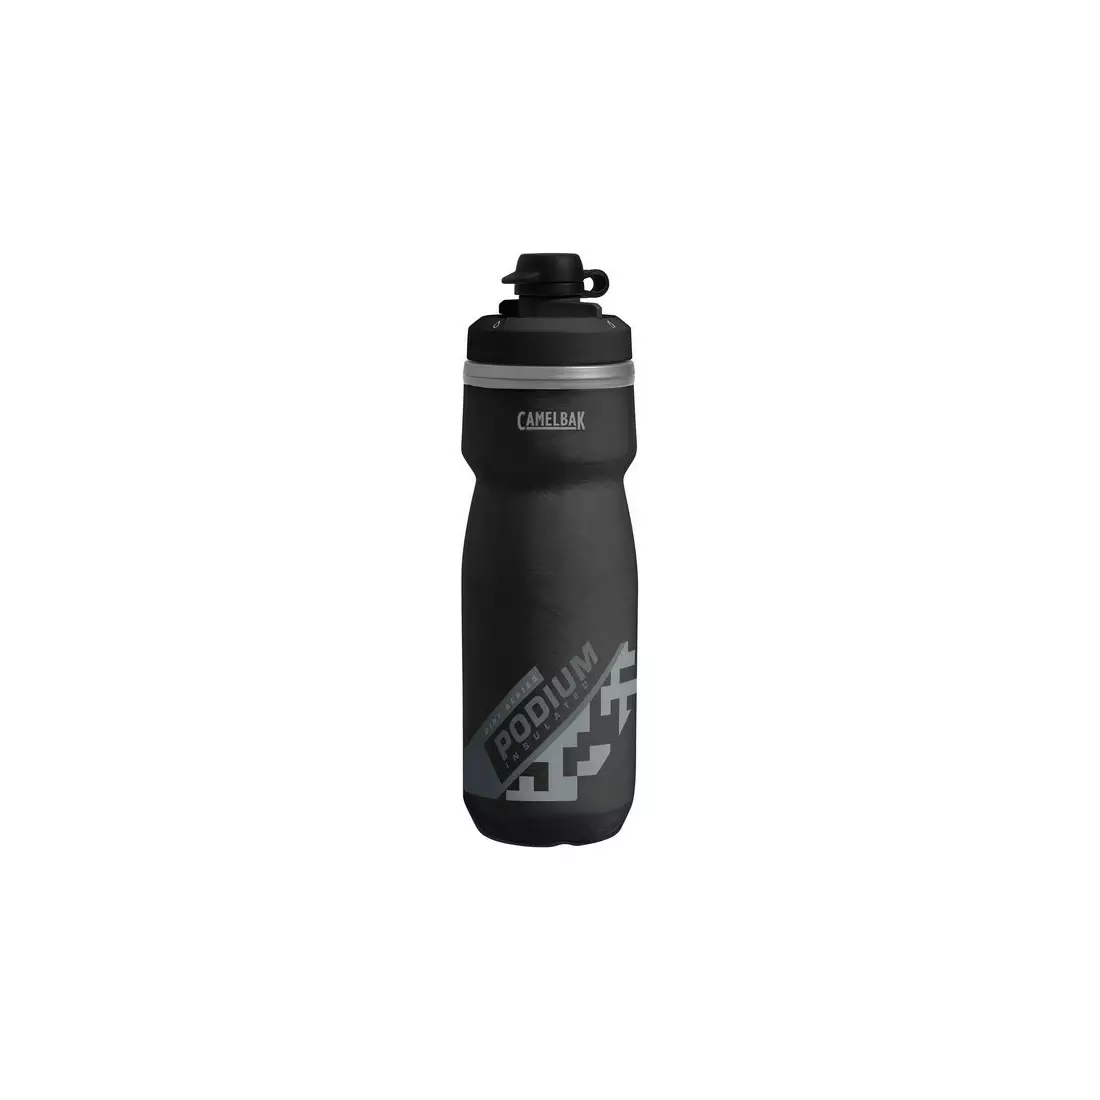 CAMELBAK Thermal bicycle water bottle Podium Dirt Series Insulated 620ml c1901/001062/UNI